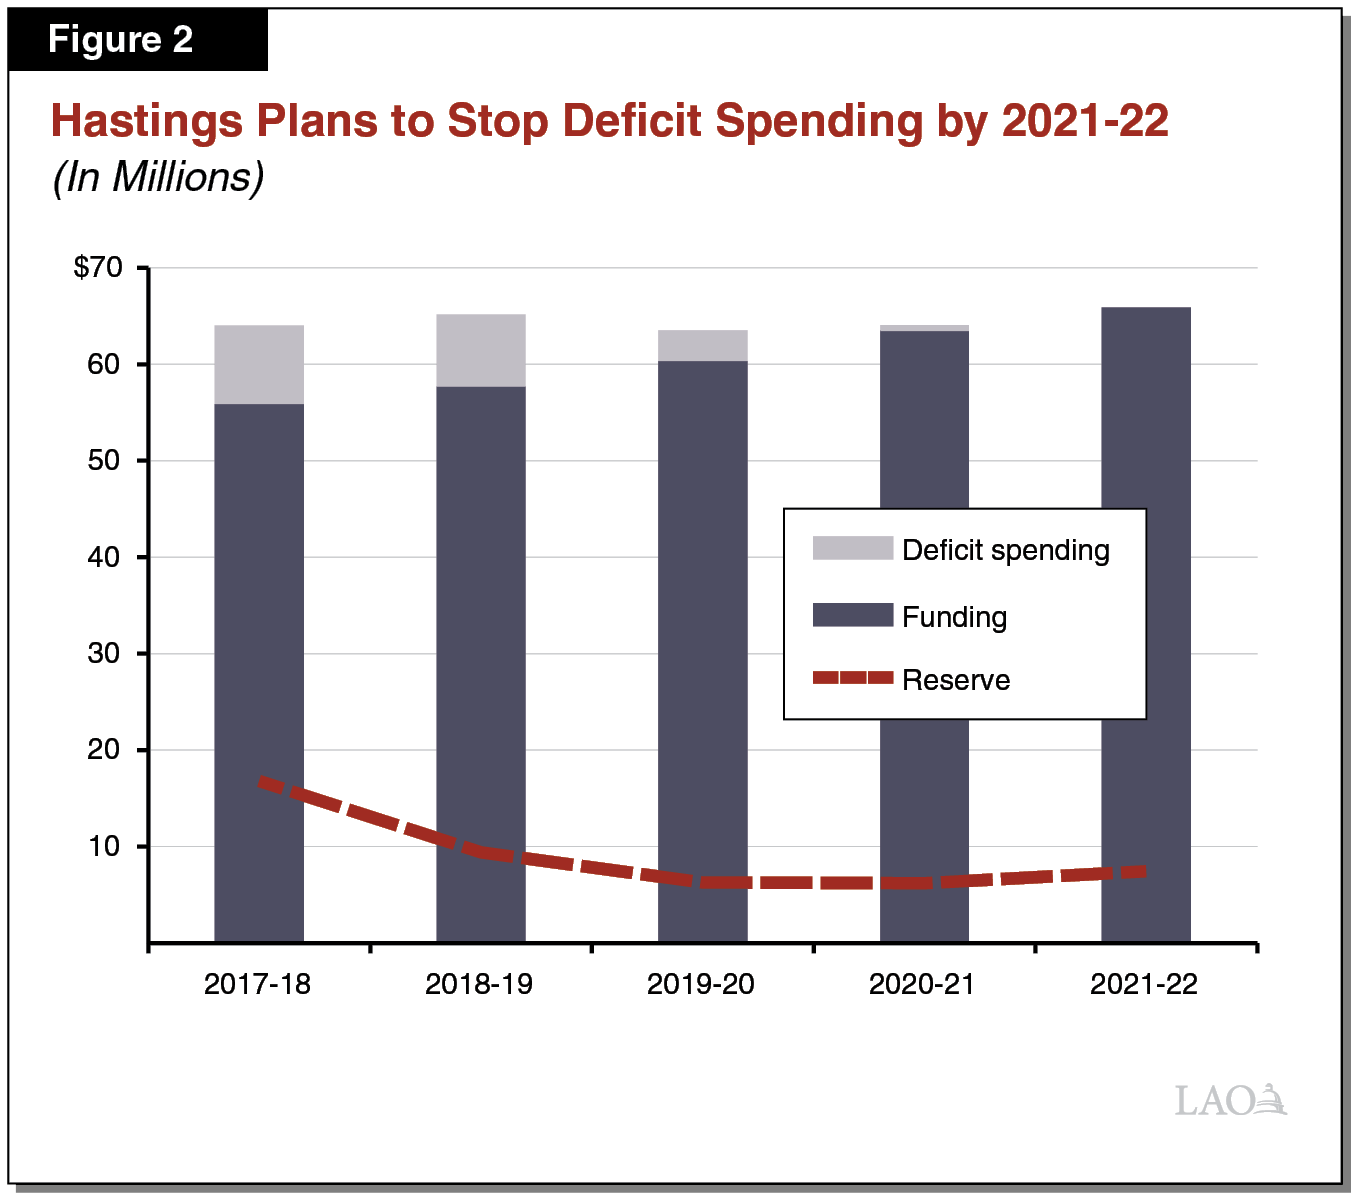 Figure 2 - Hastings Plans to Stop Deficit Spending by 2021-22